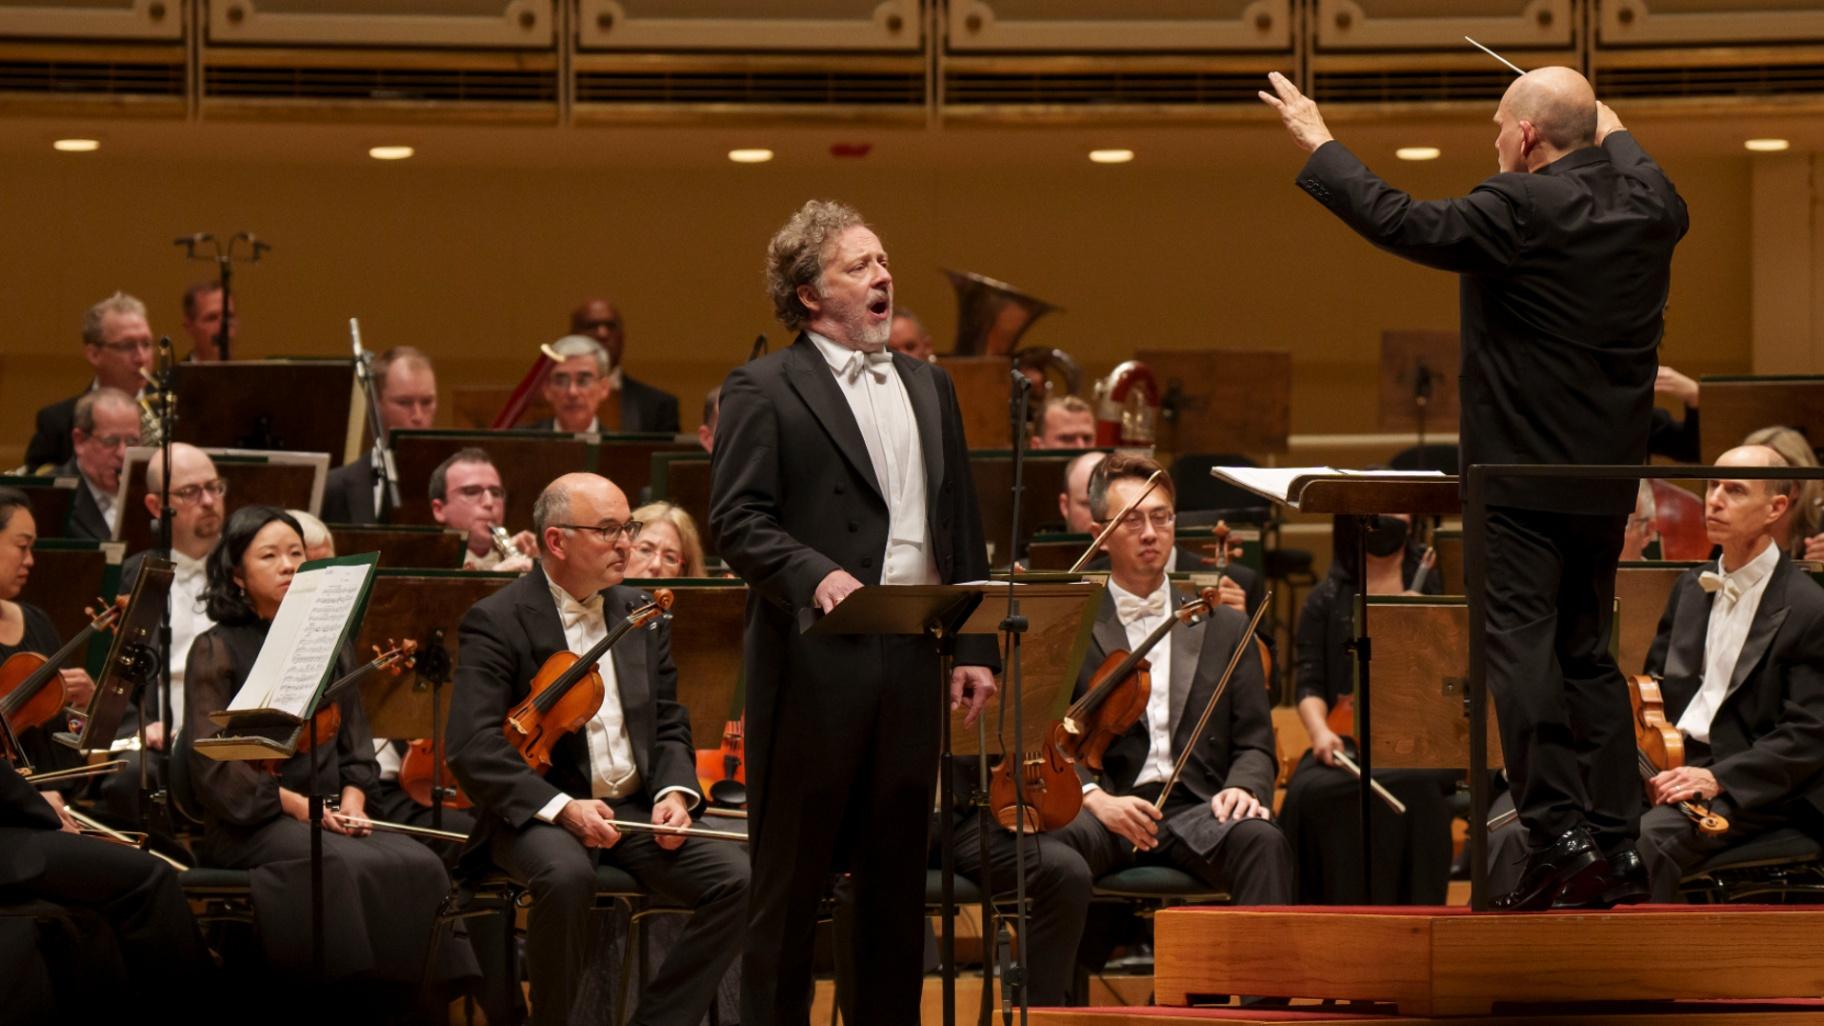 Baritone Christian Gerhaher performs songs from Mahler’s “Des Knaben Wunderhorn,” led by Jaap van Zweden with the Chicago Symphony Orchestra. (Todd Rosenberg)